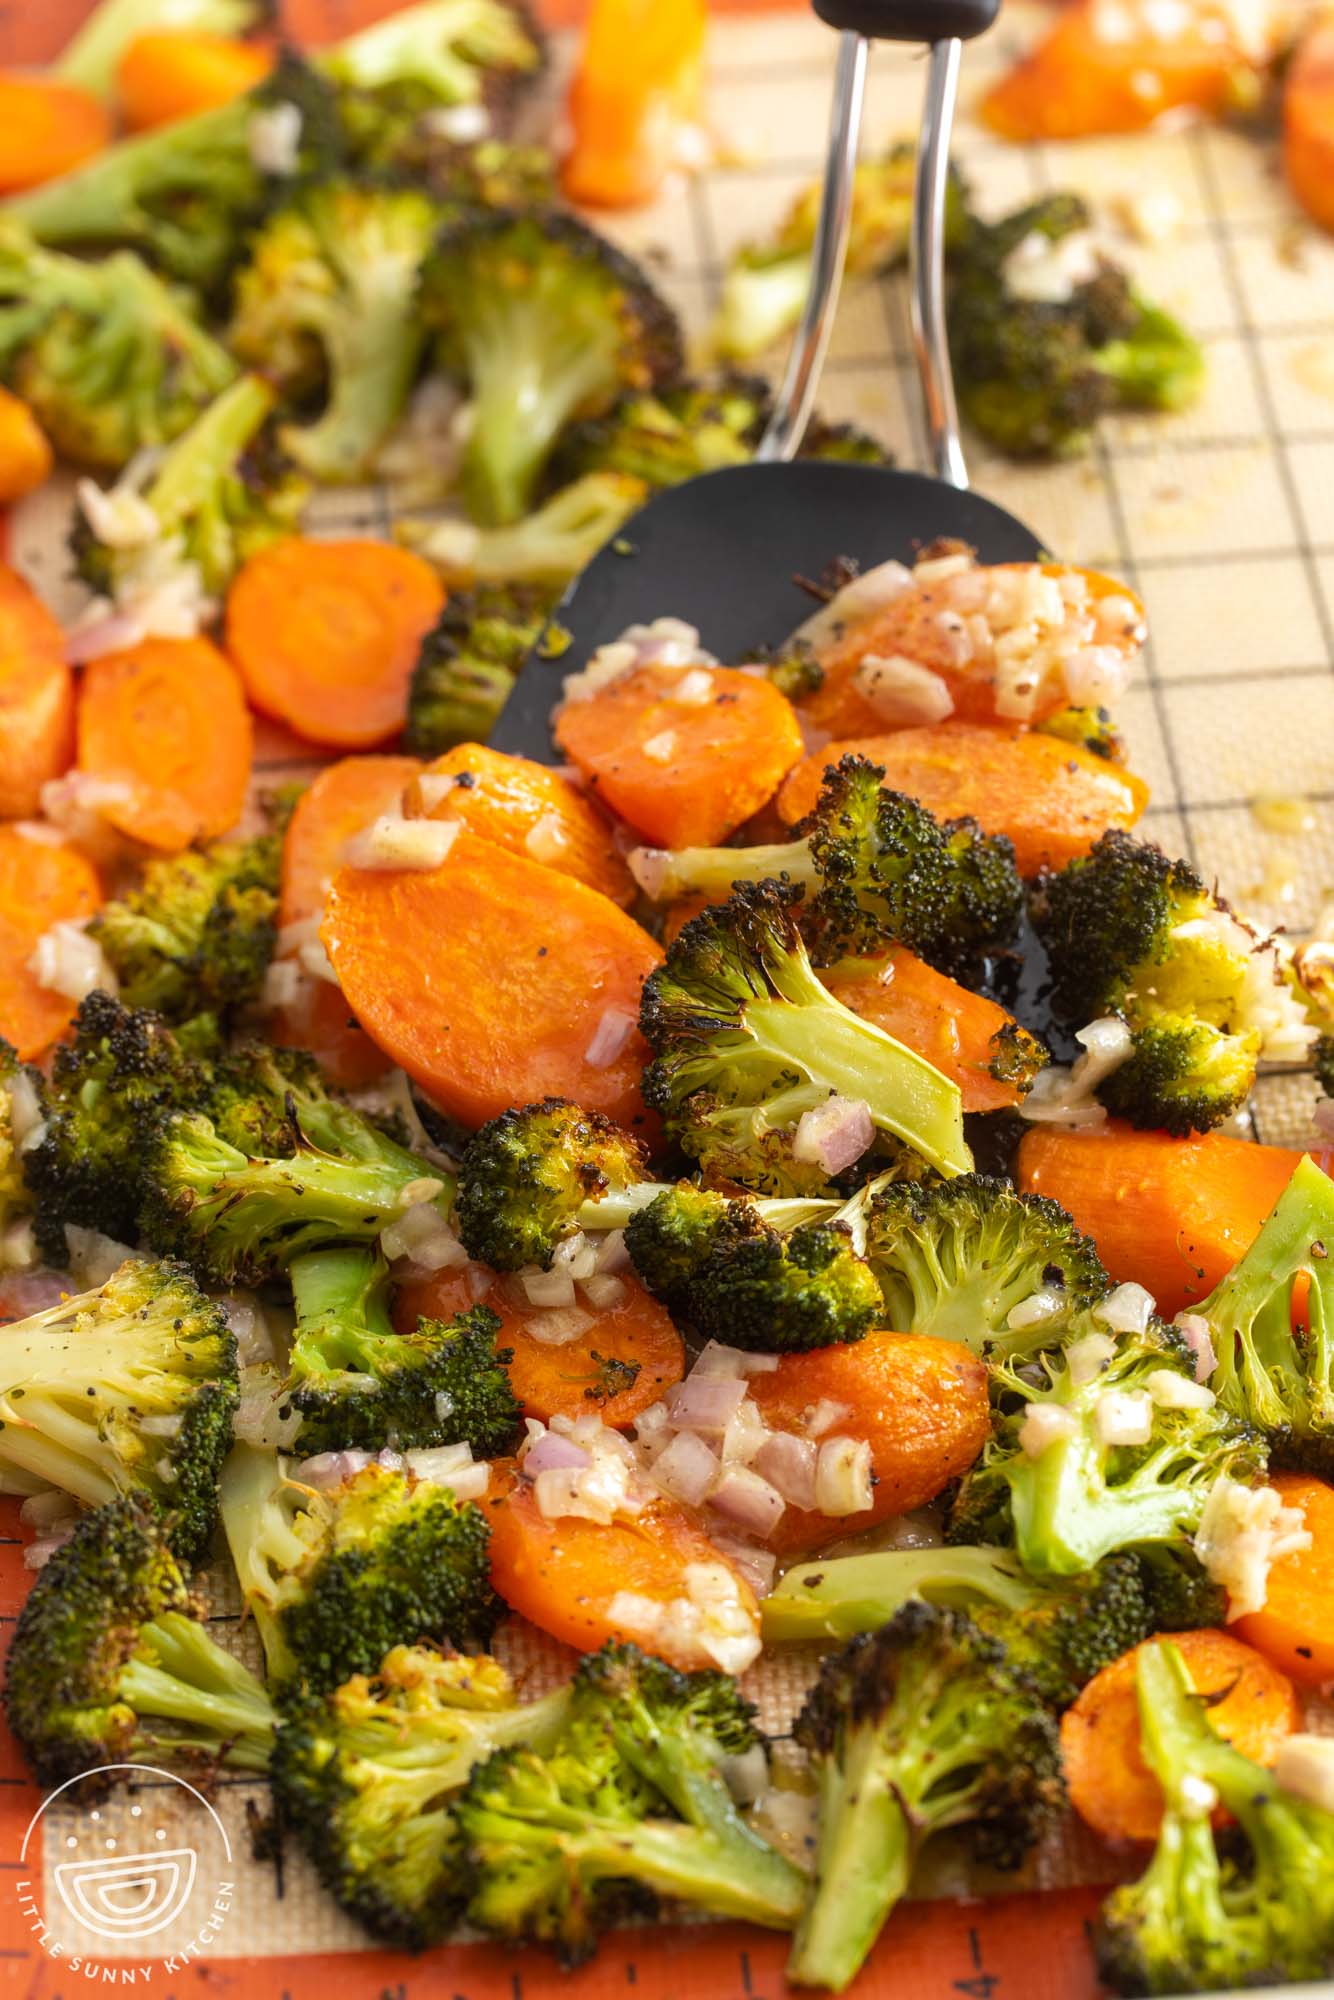 roasted broccoli and carrots with shallots on a gridded silpat, served with a spatula